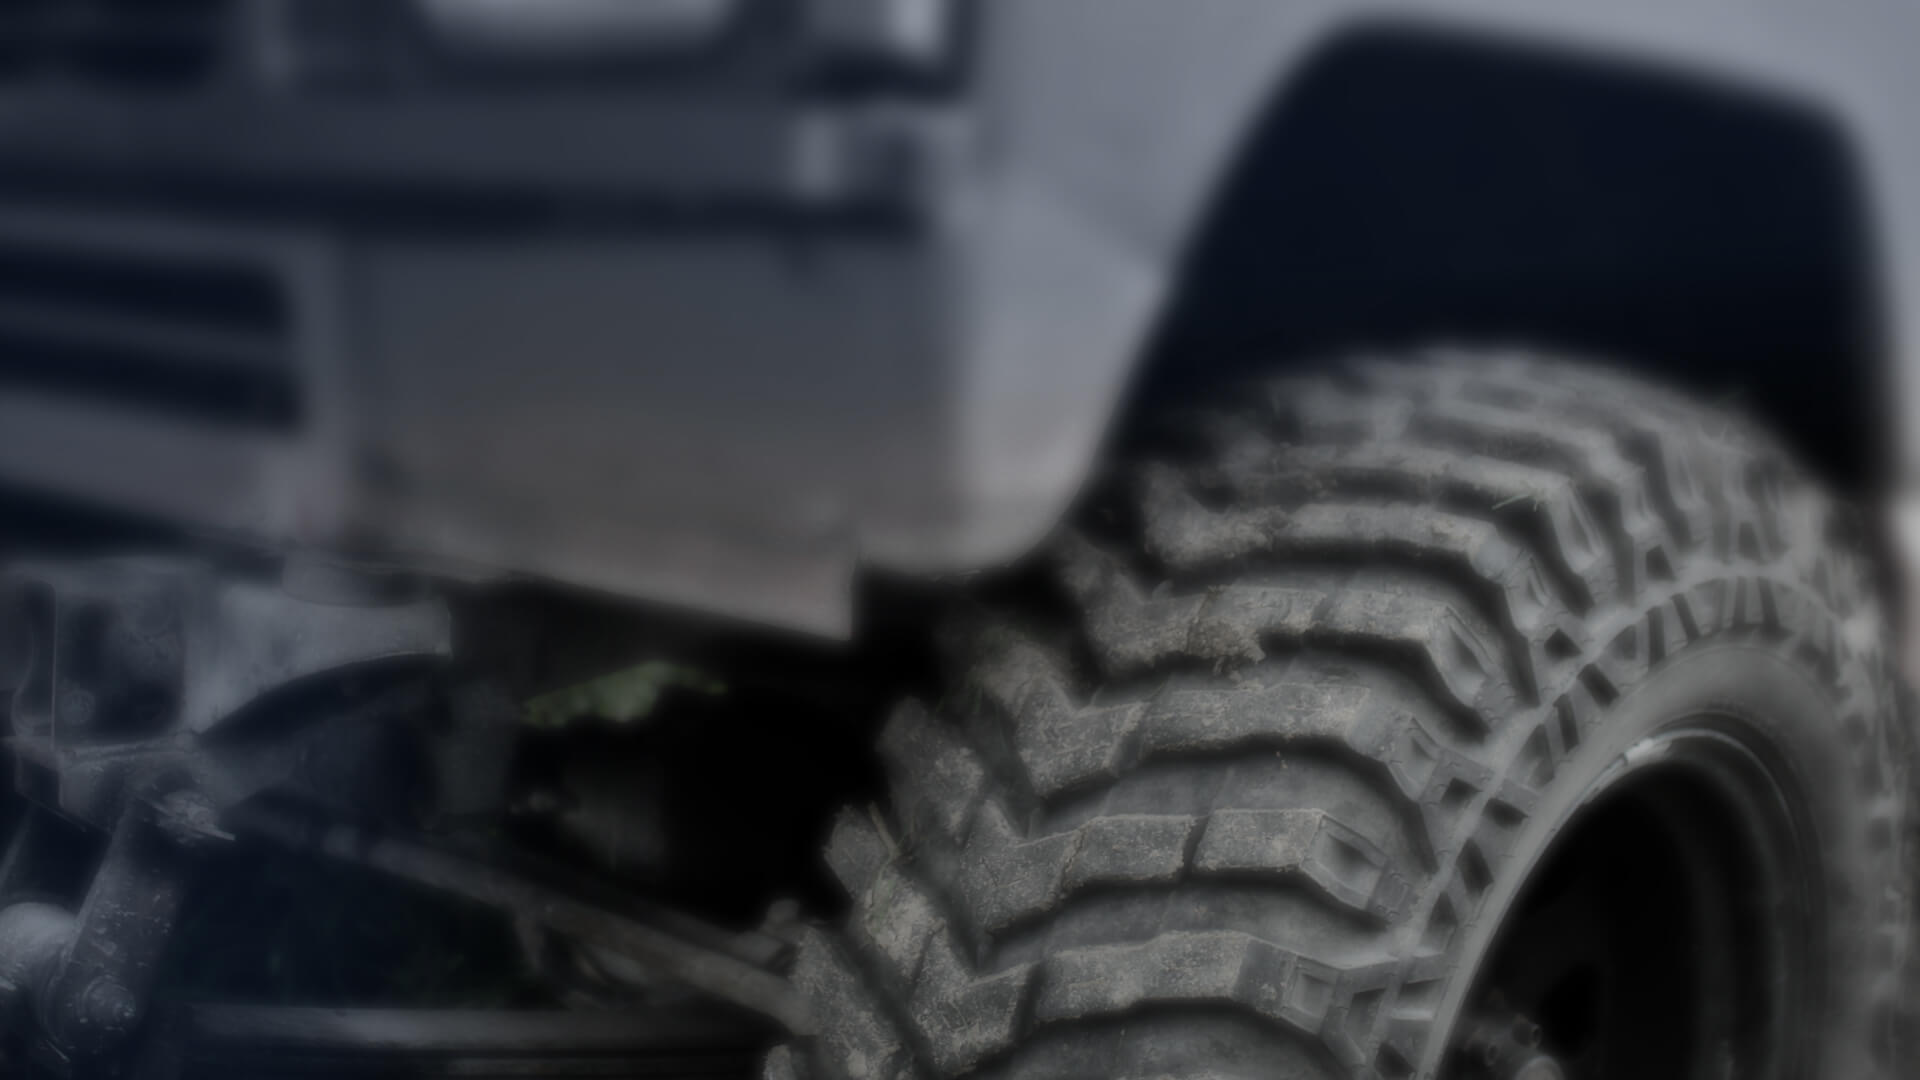 Close up on a vehicle "boosted" with a lift kit